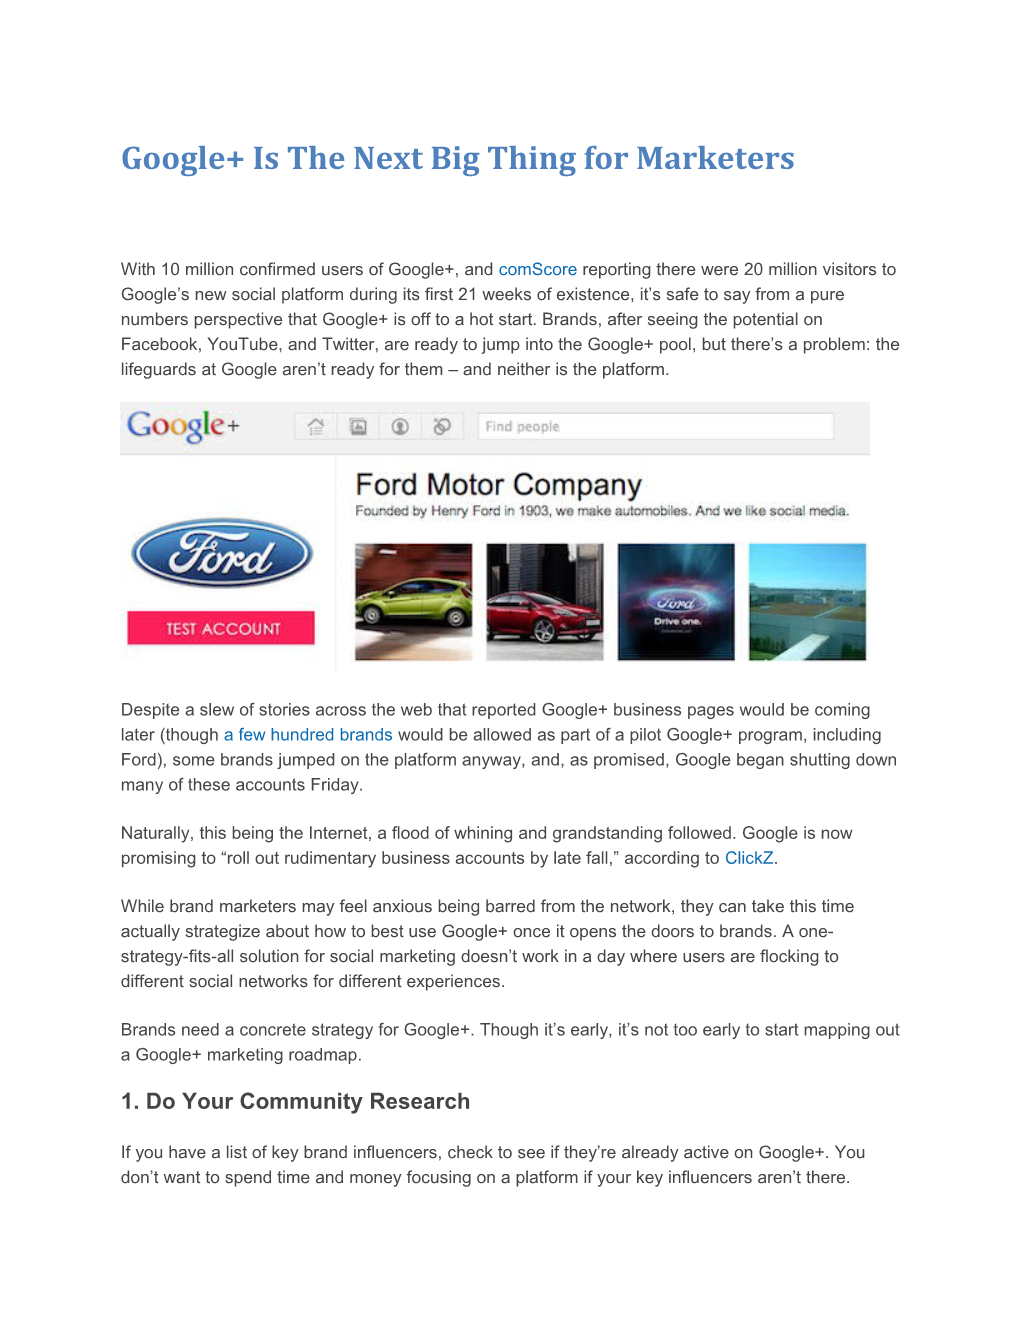 Google+ Is the Next Big Thing for Marketers